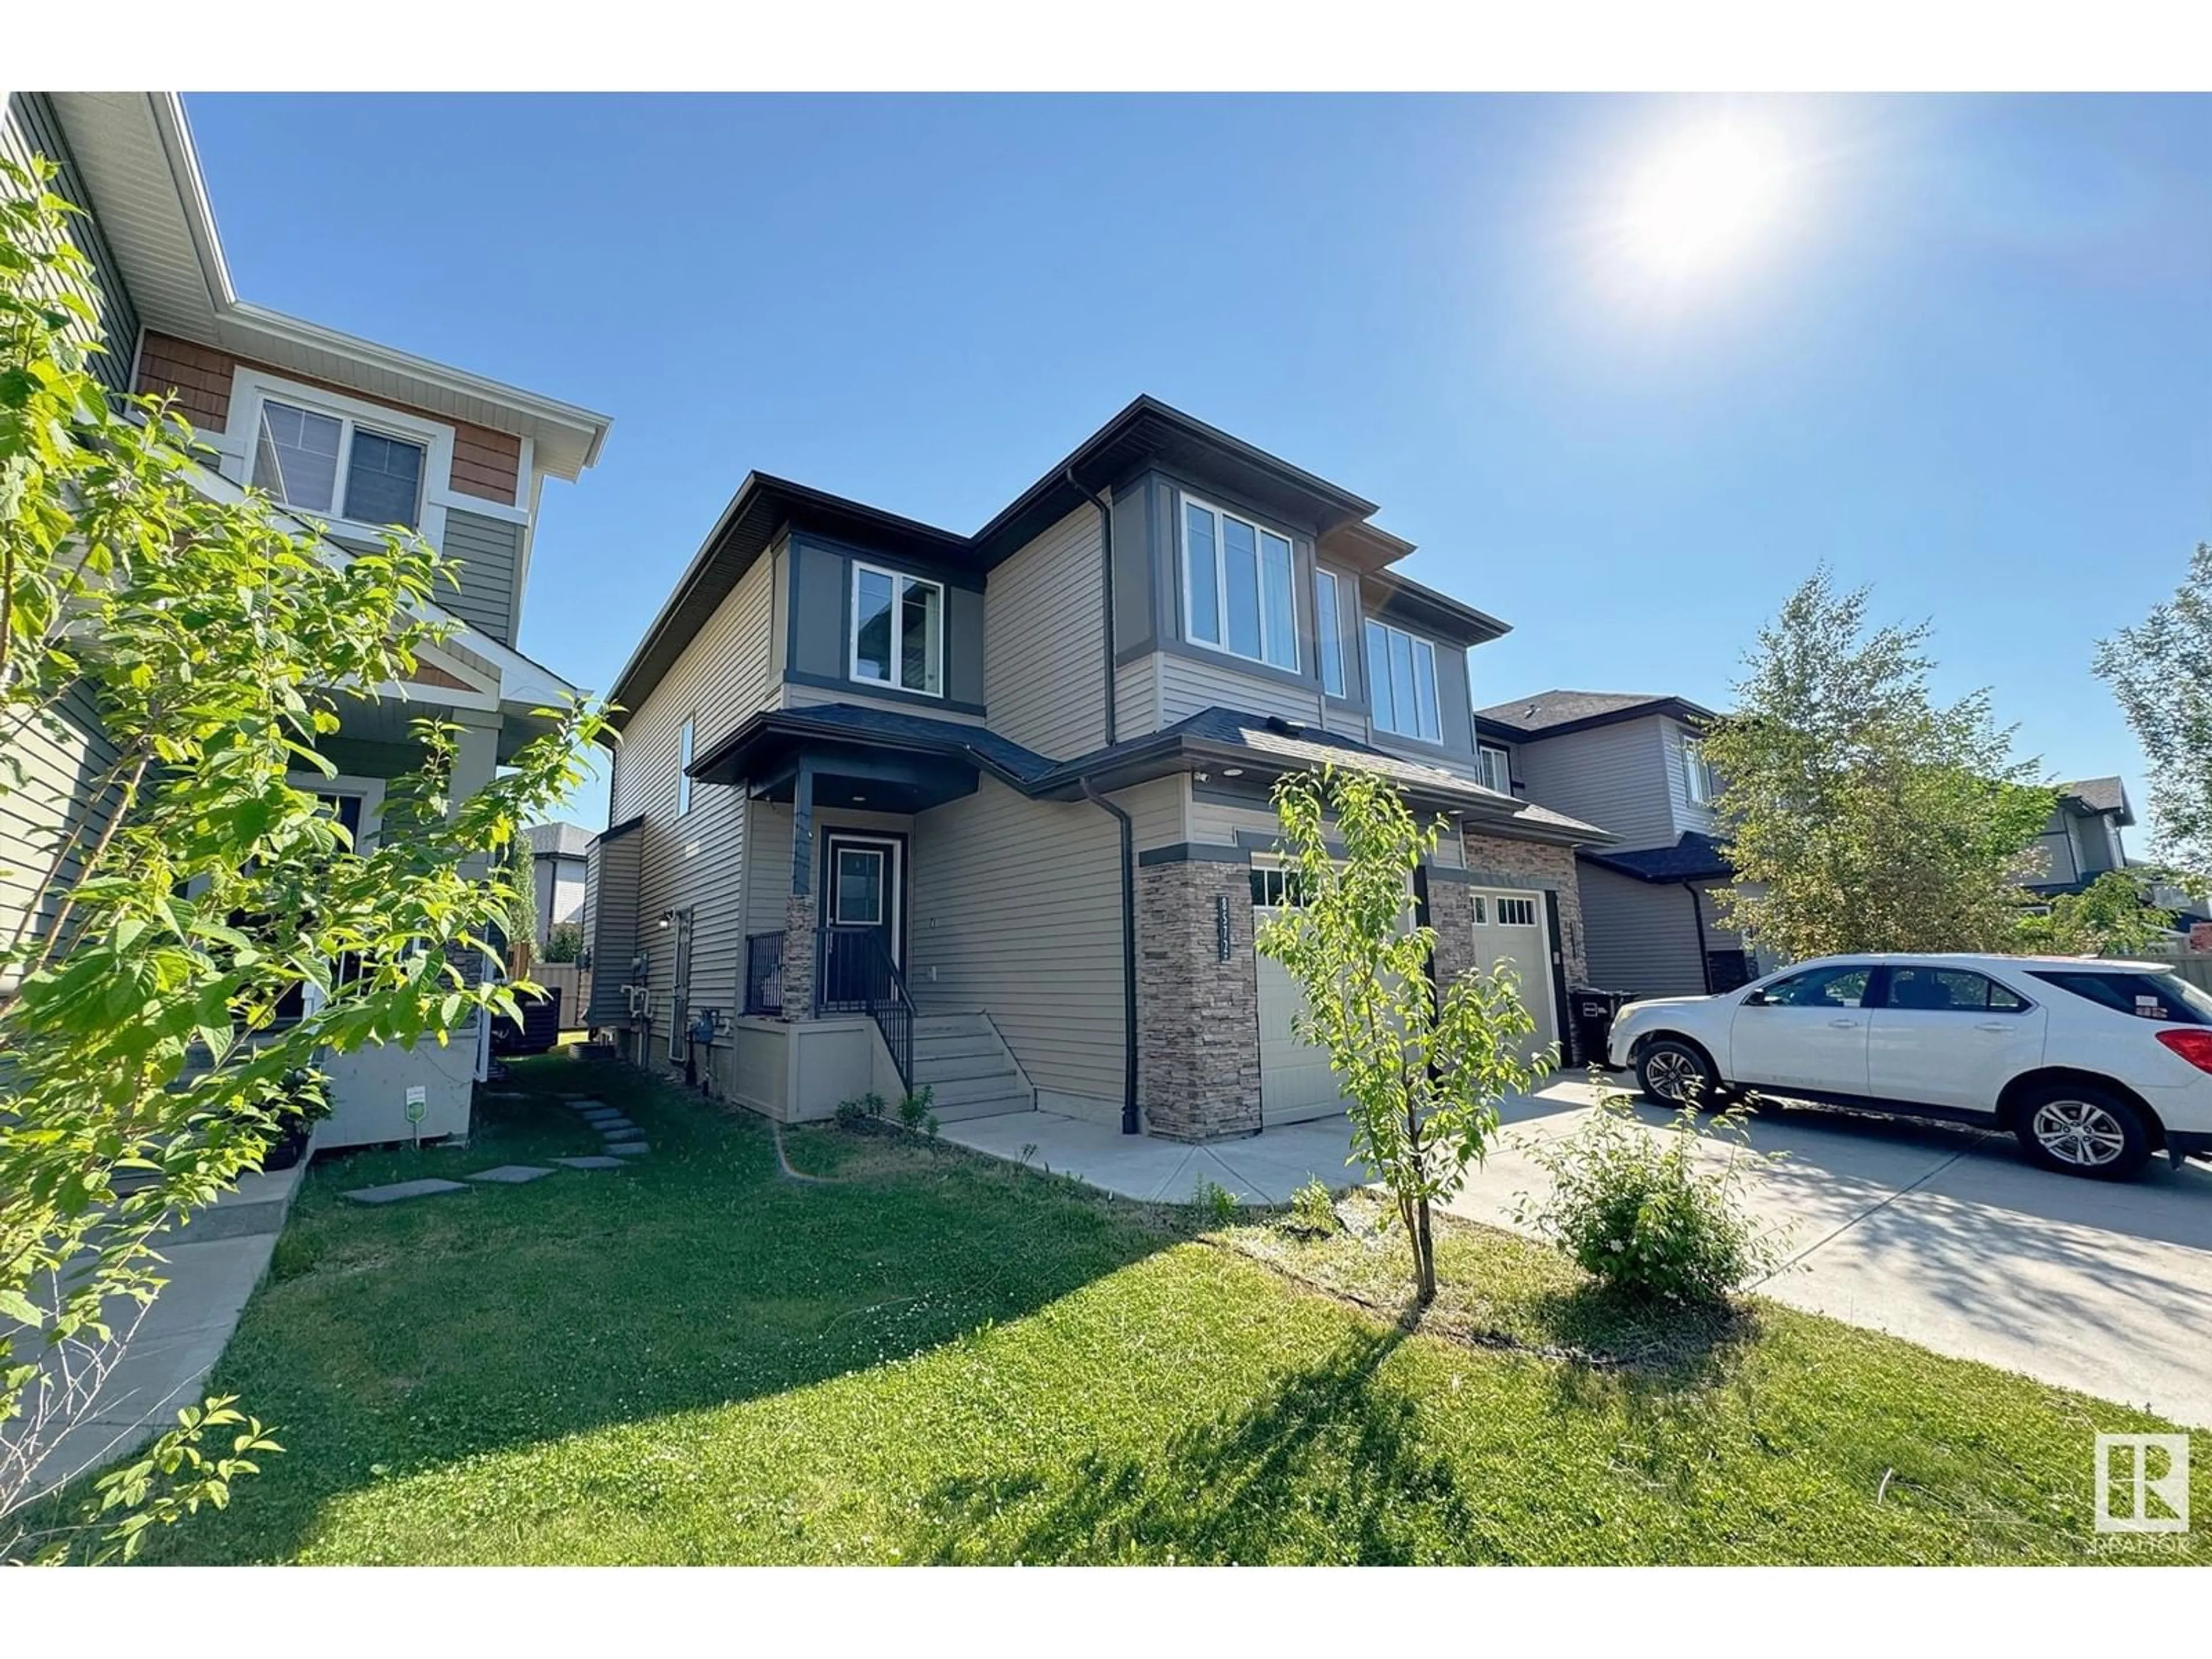 A pic from exterior of the house or condo for 8572 CUSHING PL SW SW, Edmonton Alberta T6W3R4